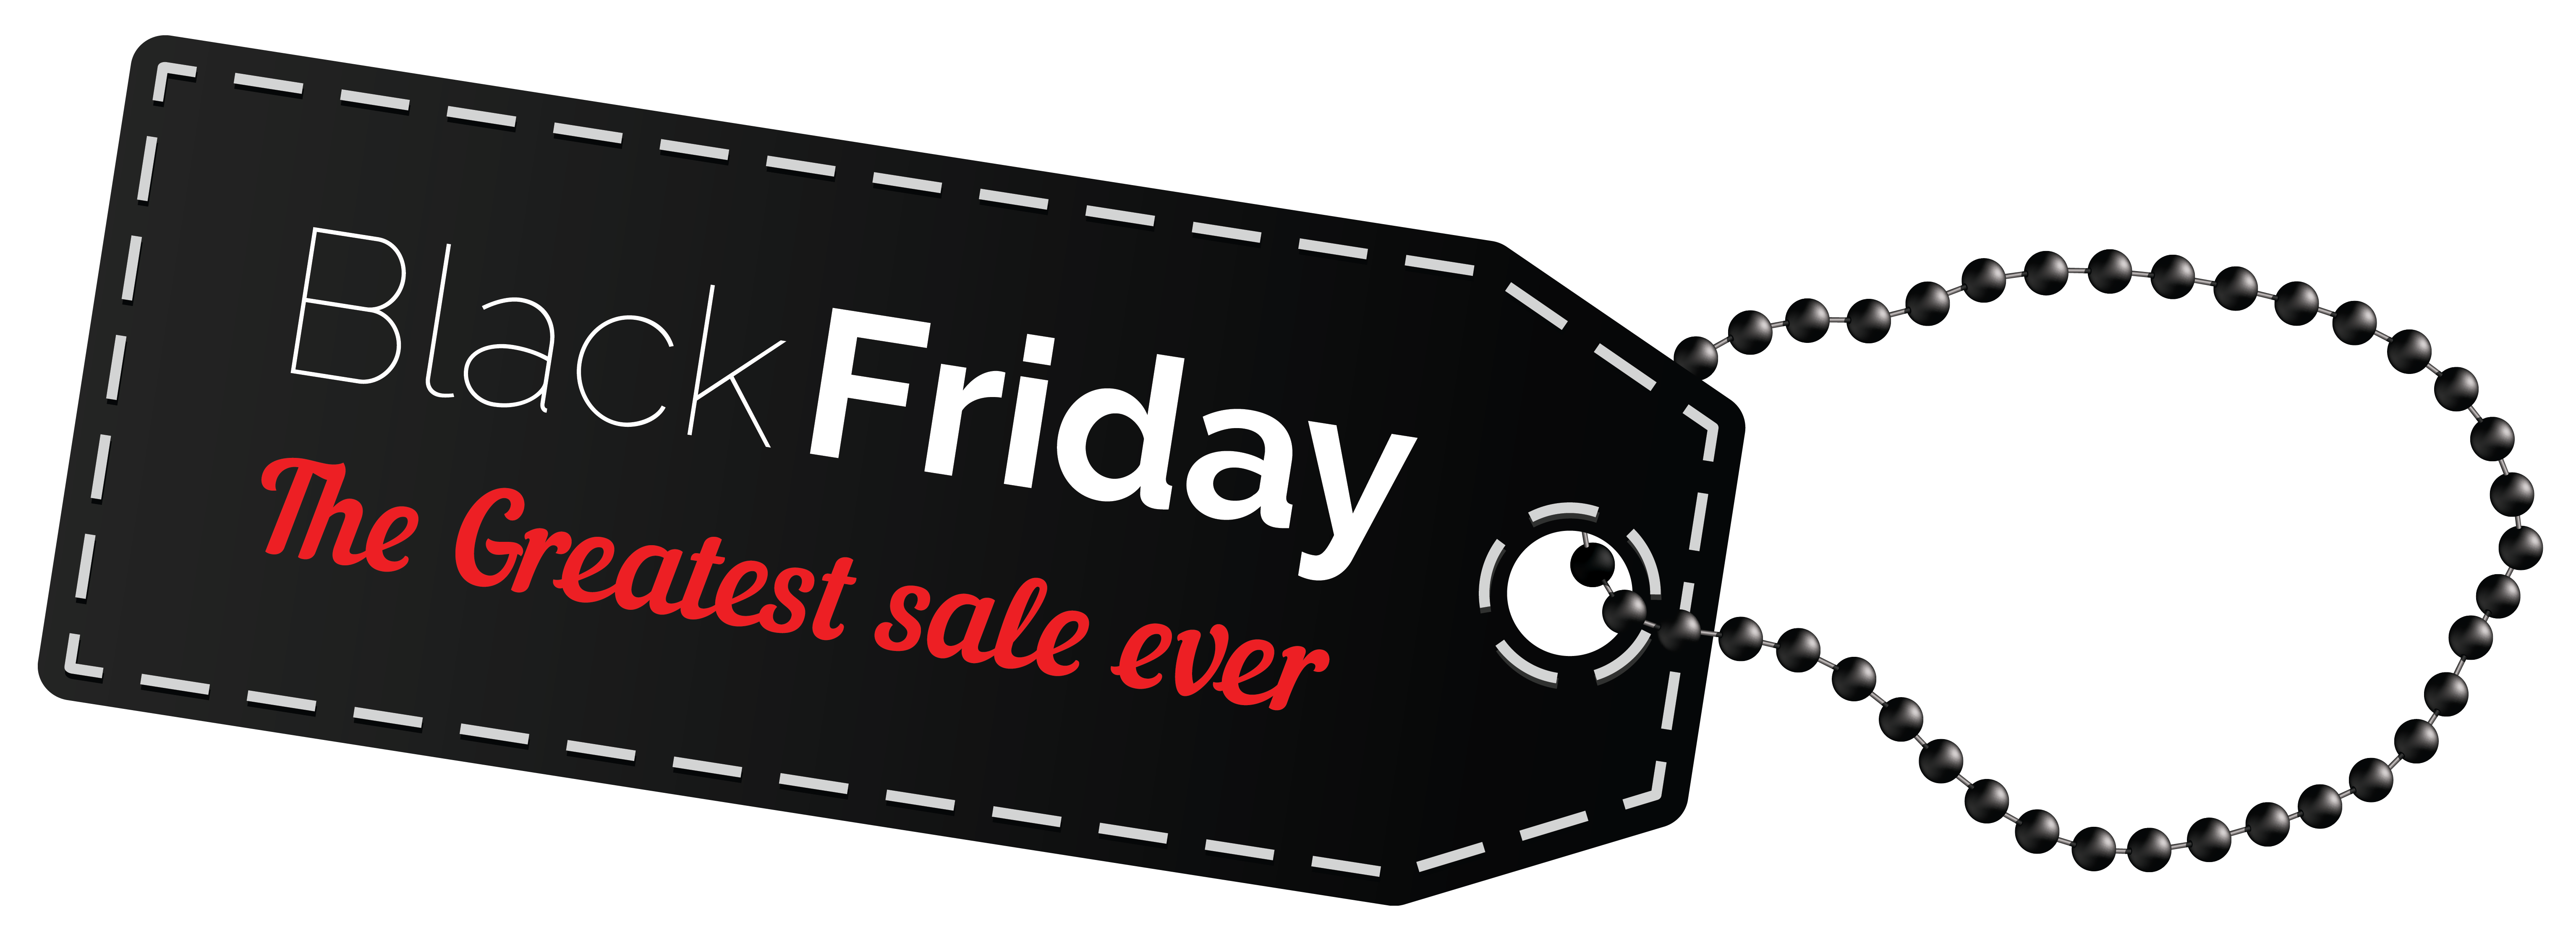 Black Friday Greatest Sale Tag PNG Clipart Image.